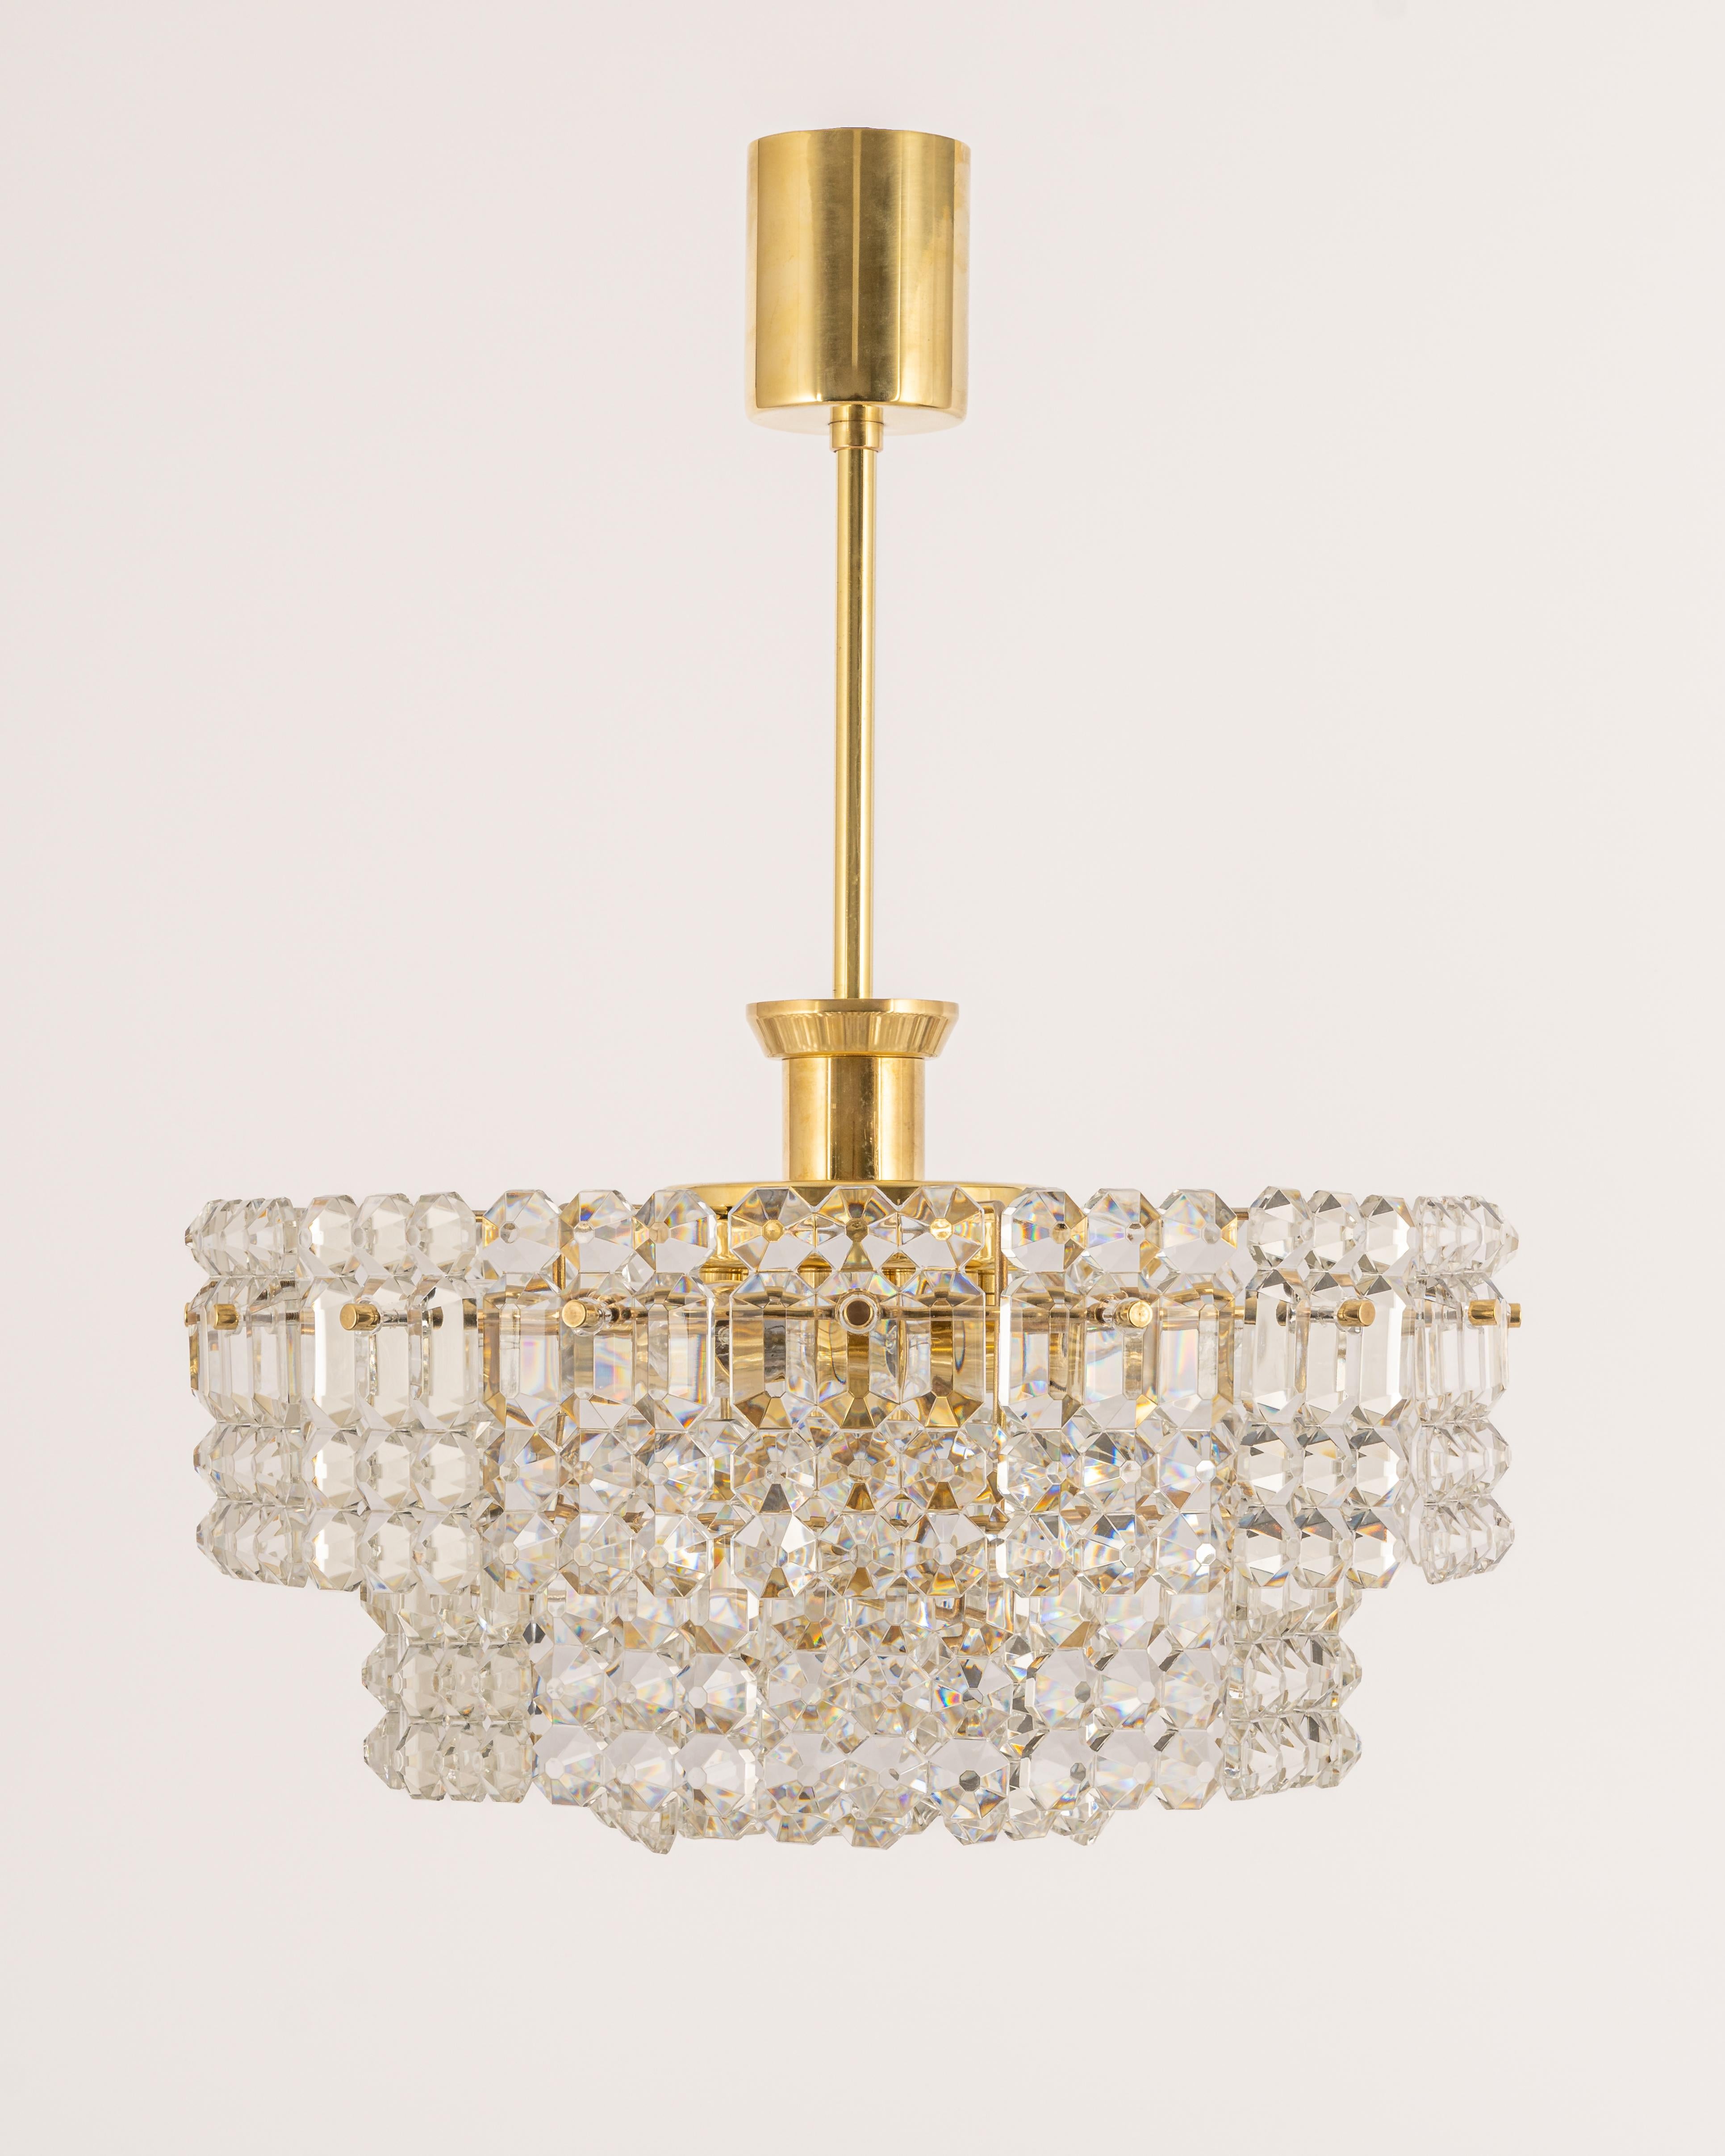 A stunning chandelier by Kinkeldey, Germany, manufactured circa 1970-1979. A handmade and high-quality piece. The ceiling fixture and the frame are made of brass and have 3 rings with lots of facetted crystal glass elements.

High quality and in